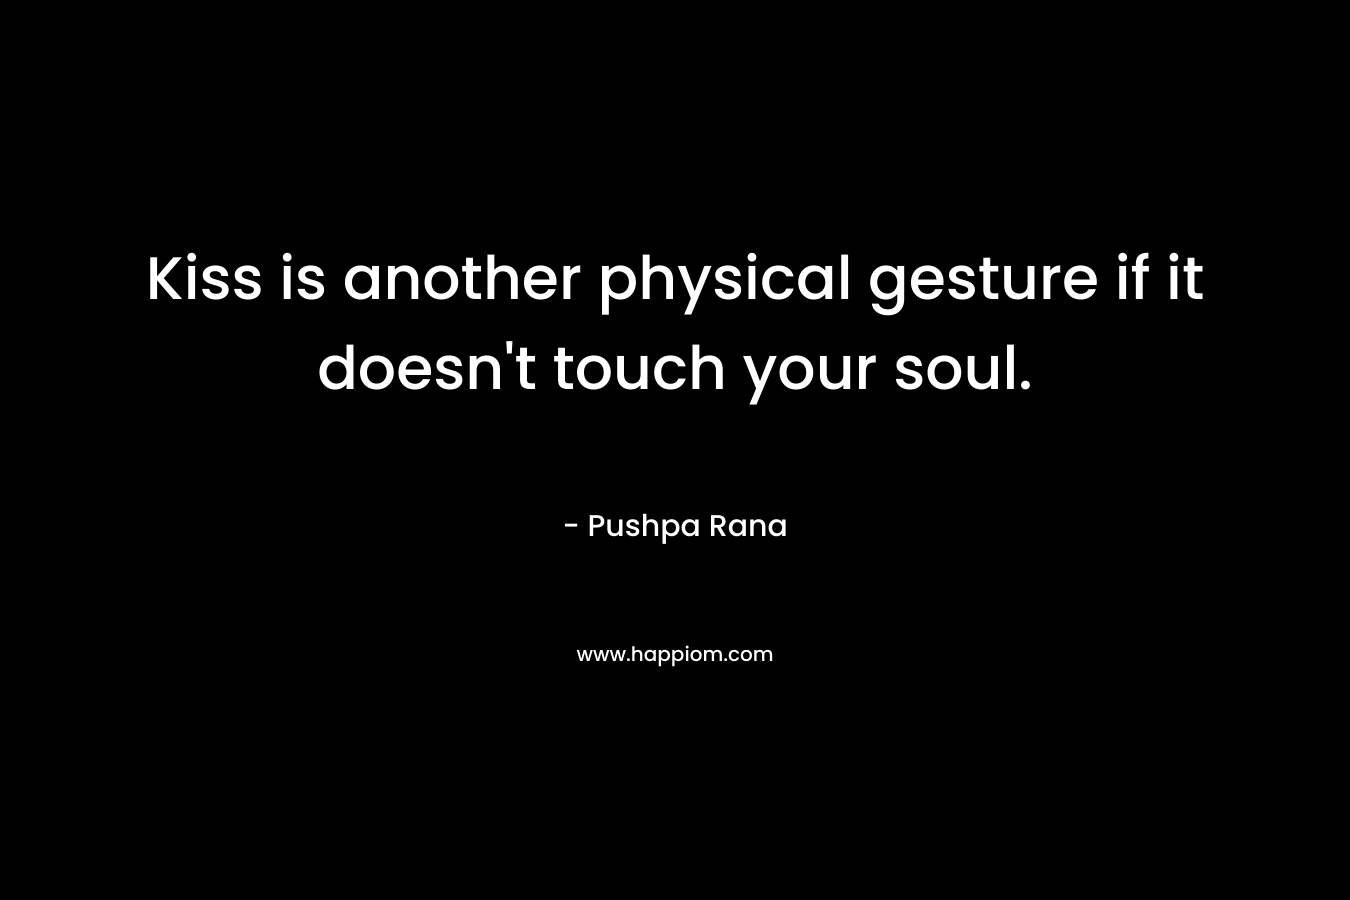 Kiss is another physical gesture if it doesn’t touch your soul. – Pushpa Rana